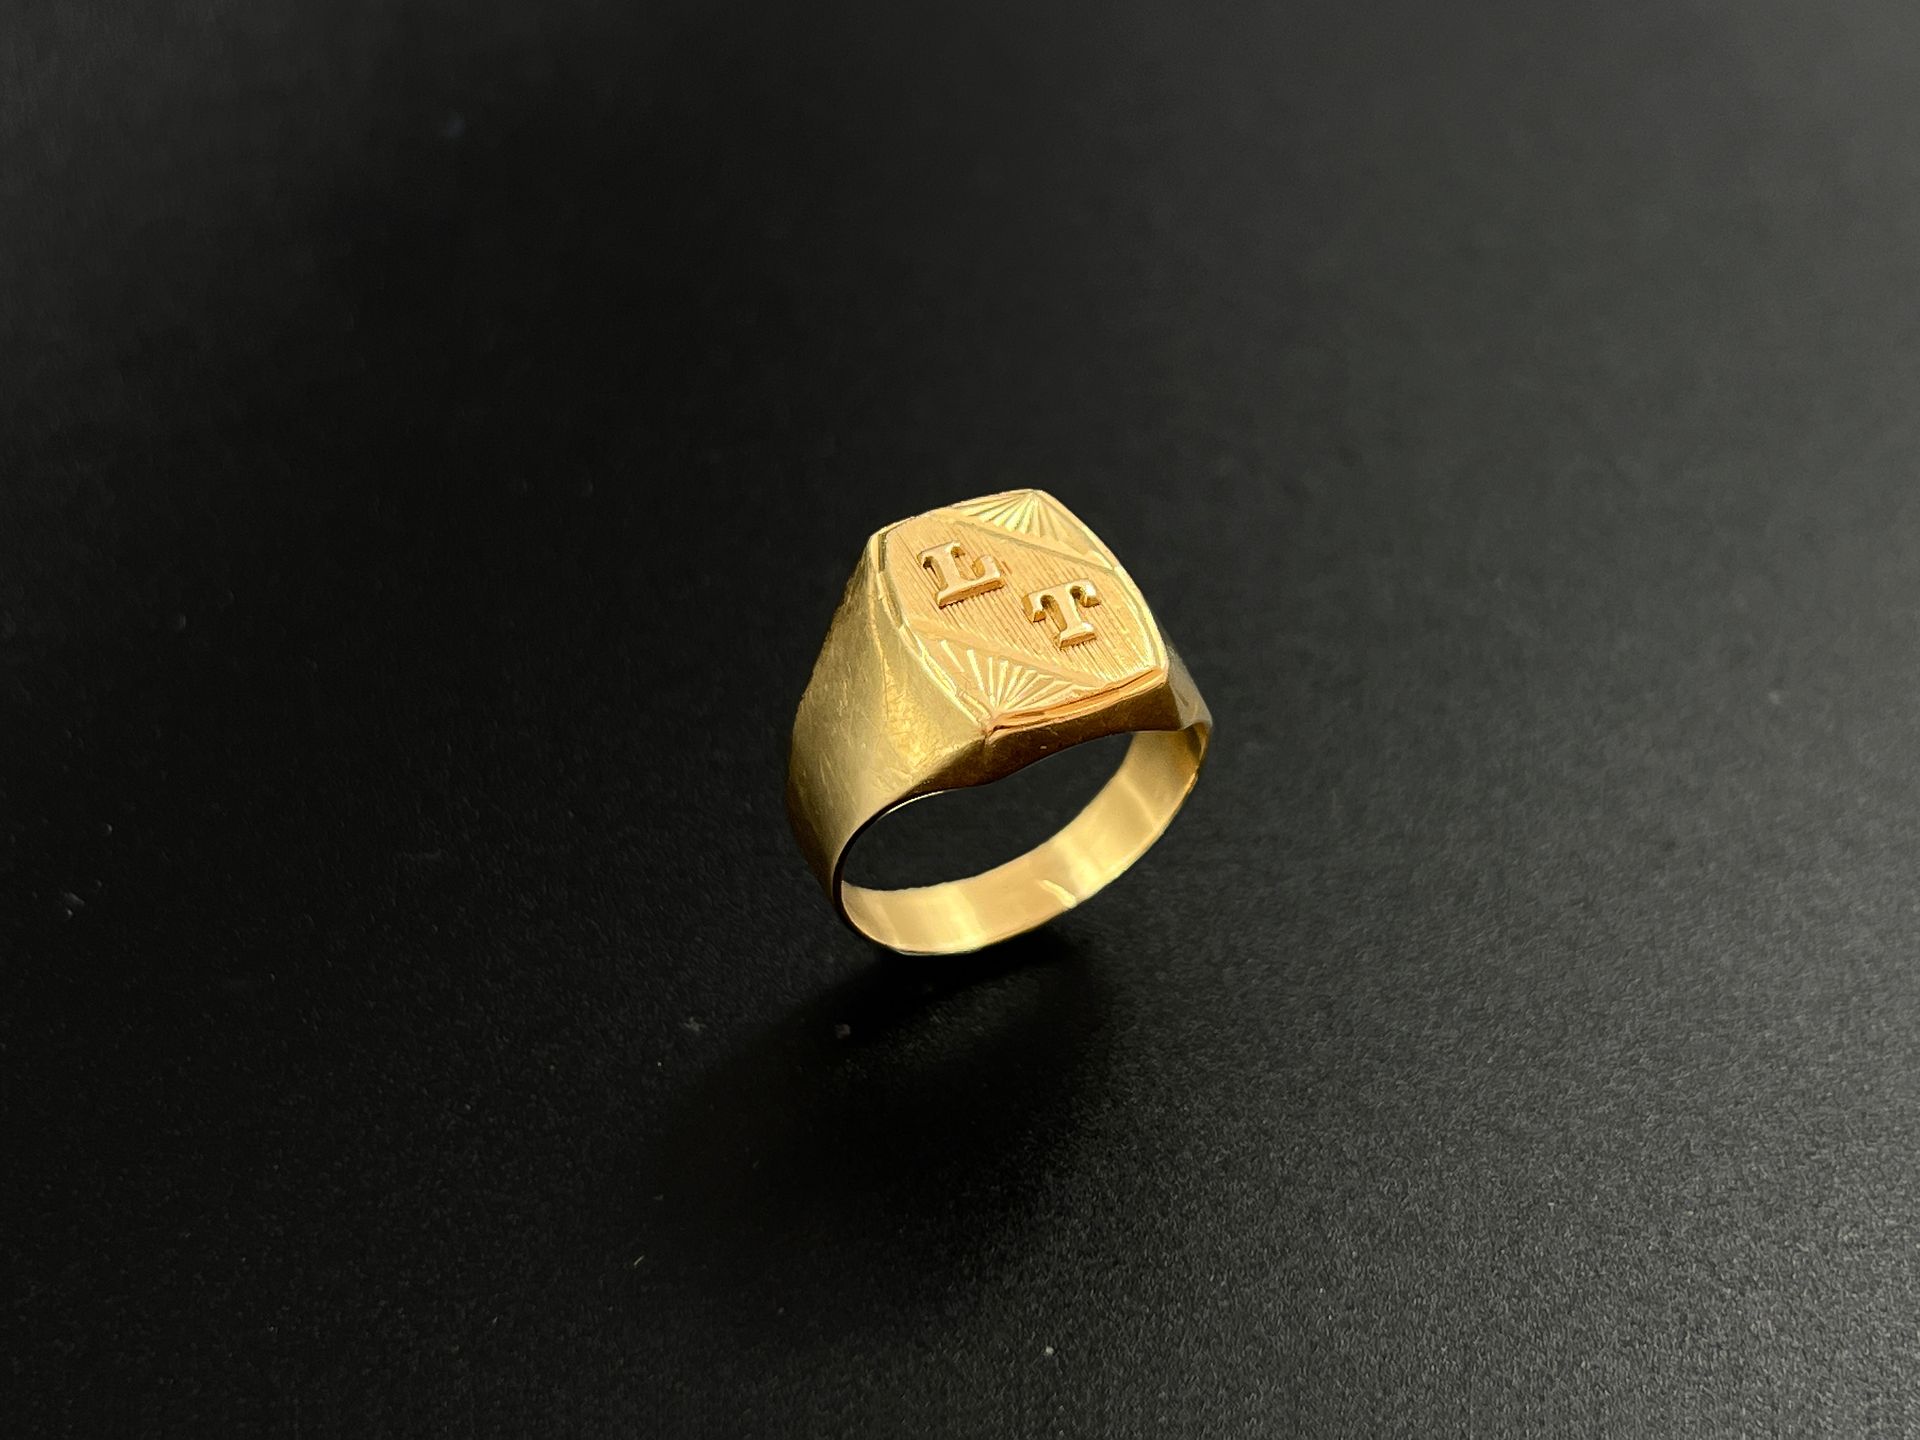 Null Ring in yellow gold (750) marked "L T" on a background of radiating pattern&hellip;